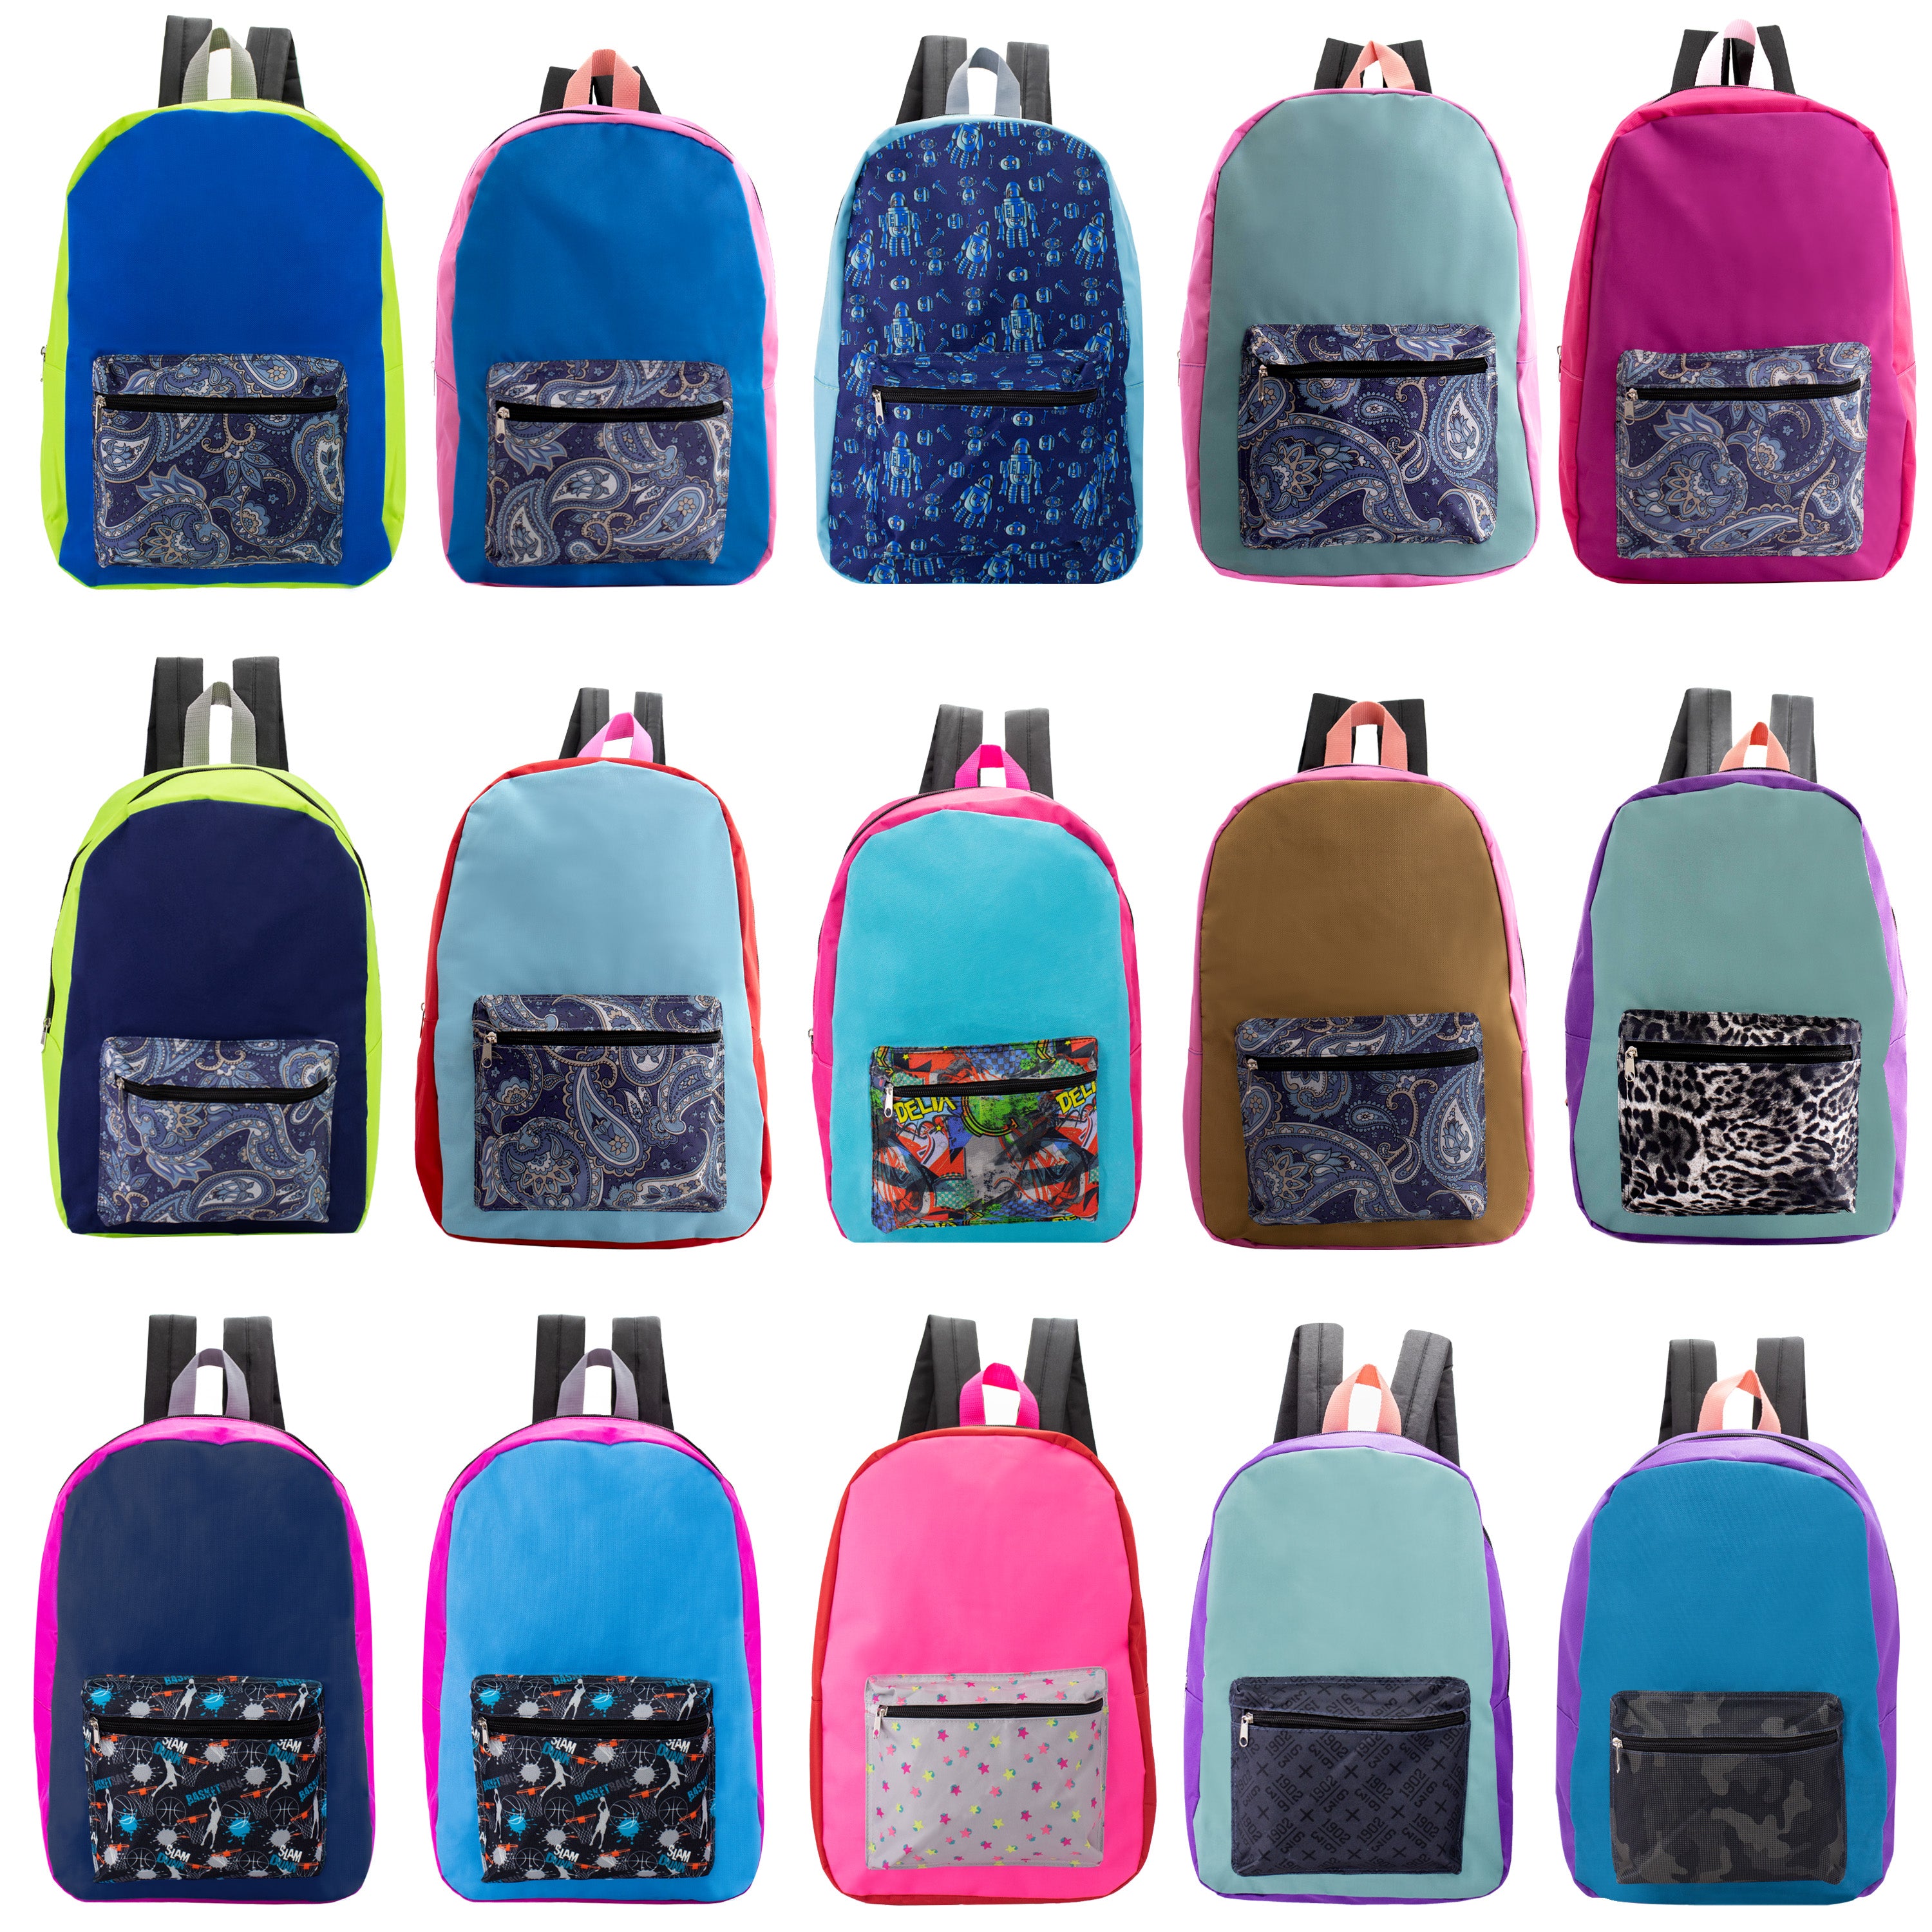 17" Kids Basic Wholesale Backpack in Randomly Assorted Solid Colors with Prints - Bulk Case of 24